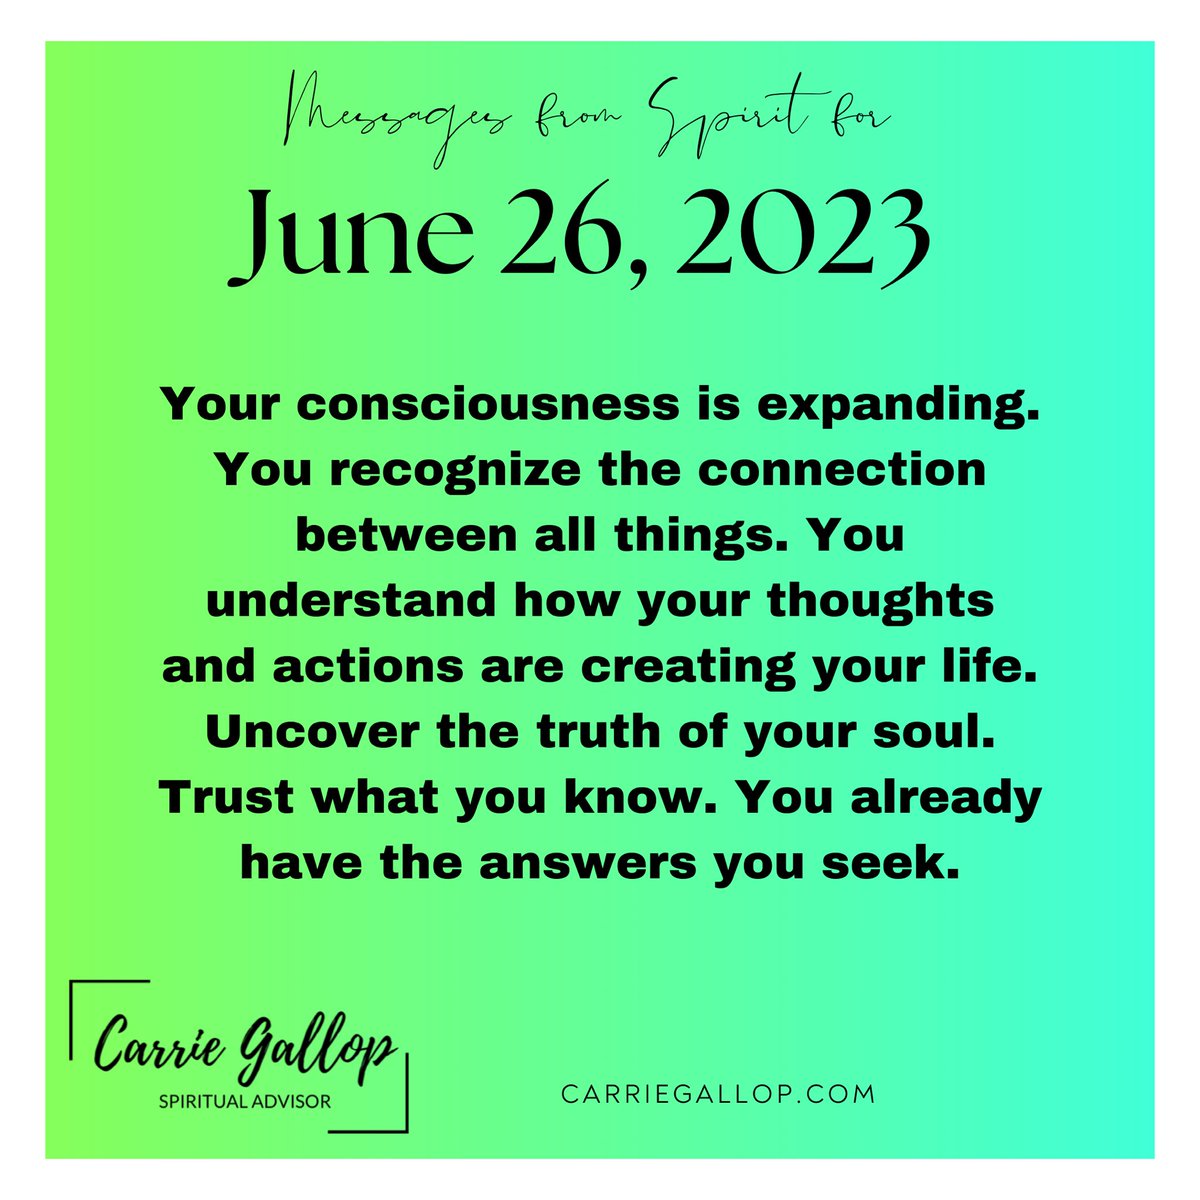 Messages From Spirit for June 26, 2023 ✨

#Daily #Guidance #Message #MessagesFromSpirit #June26 #Consciousness #Expanding #Recognize #Connection #AllThings #Connected #Thoughts #Actions #Create #Life #Manifesting #CoCreation #CreateYourLife #Uncover #Truth #Soul #Trust #Wisdom